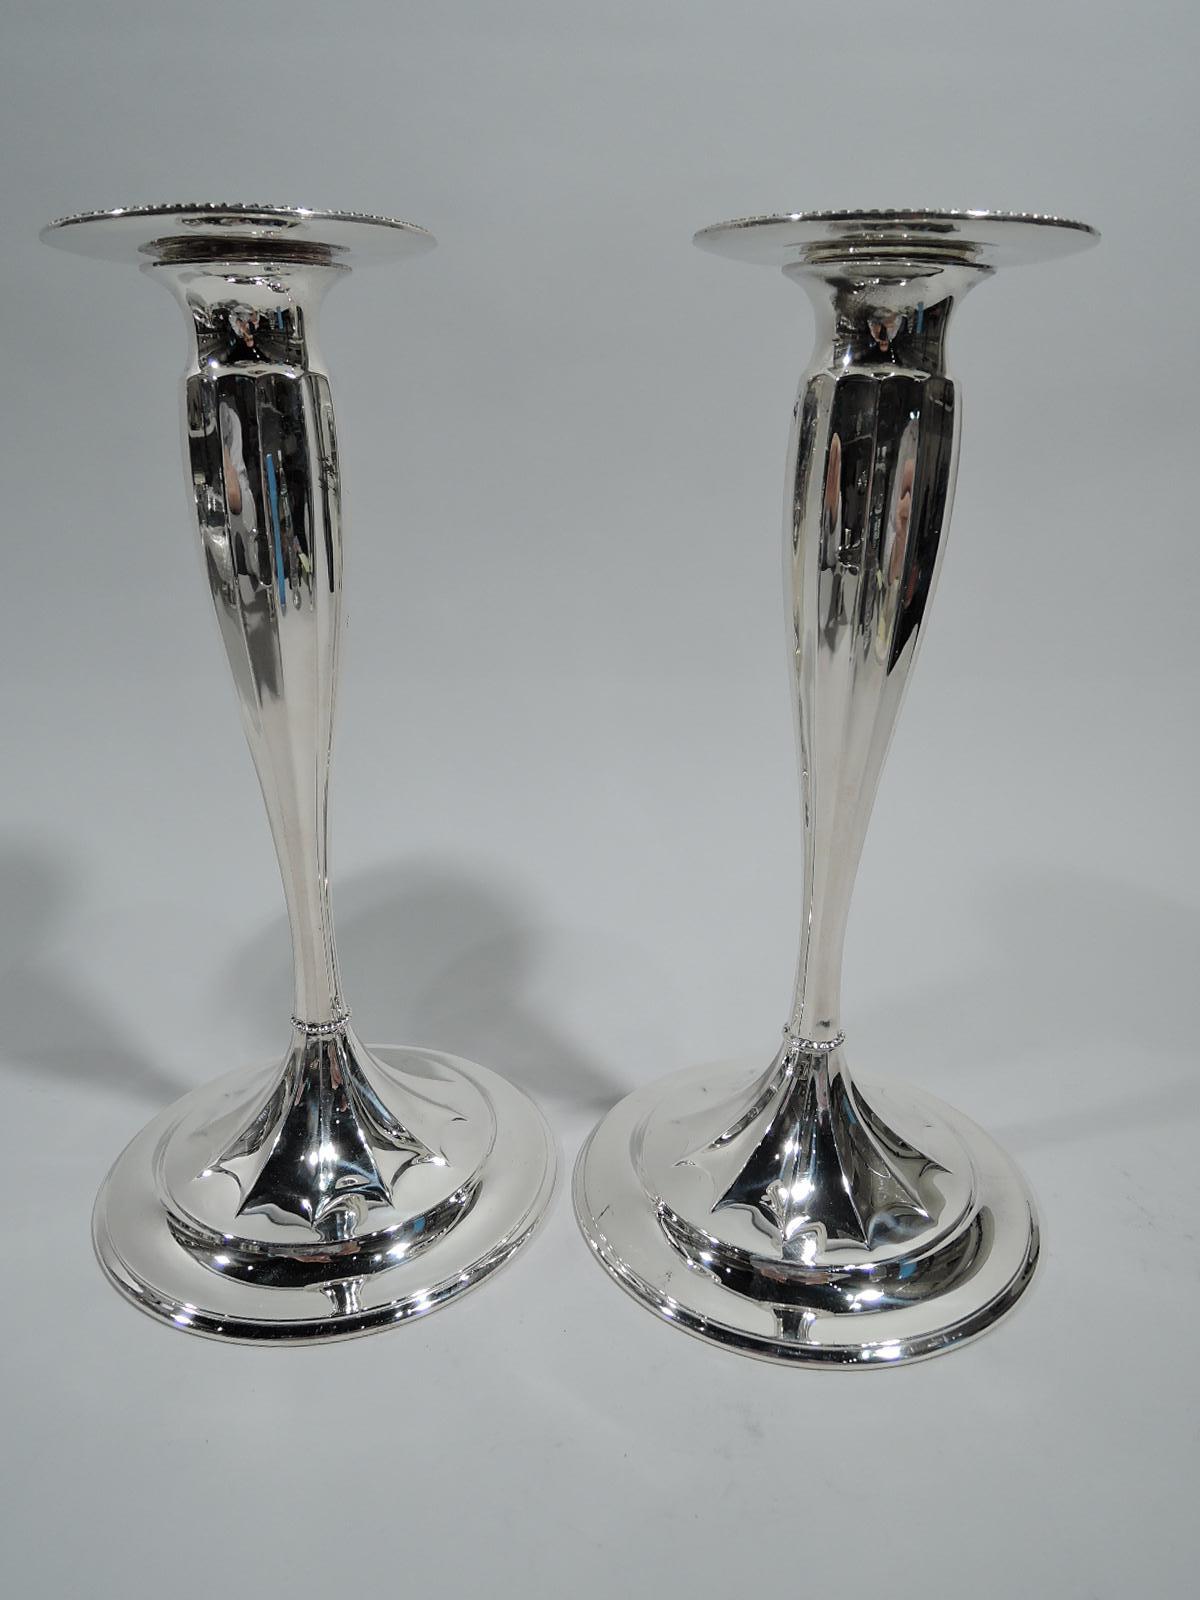 Pair of sterling silver candlesticks. Made by Tiffany & Co. in New York. Each: Fluted tapering shaft terminating in raised and fluted star on round and raised foot. Beaded knop at base. Detachable bobeche same. Hallmark includes pattern no. 12221